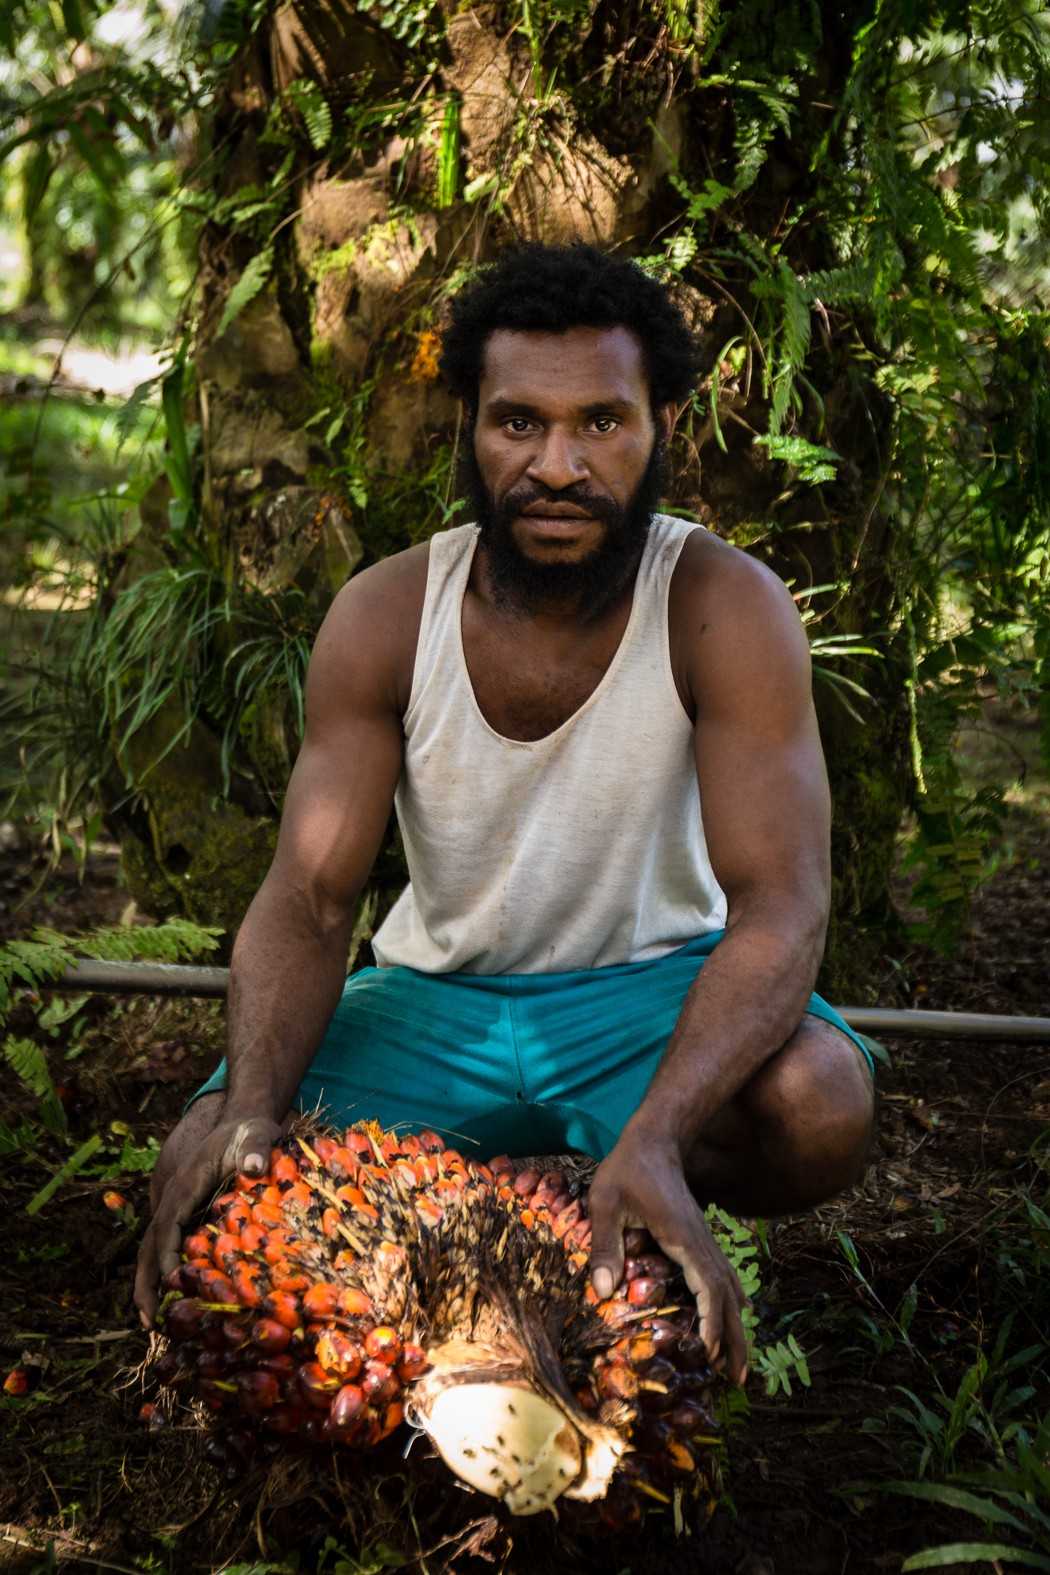 Yoanis Kies, 24, works as a labourer in an oil palm plantation.